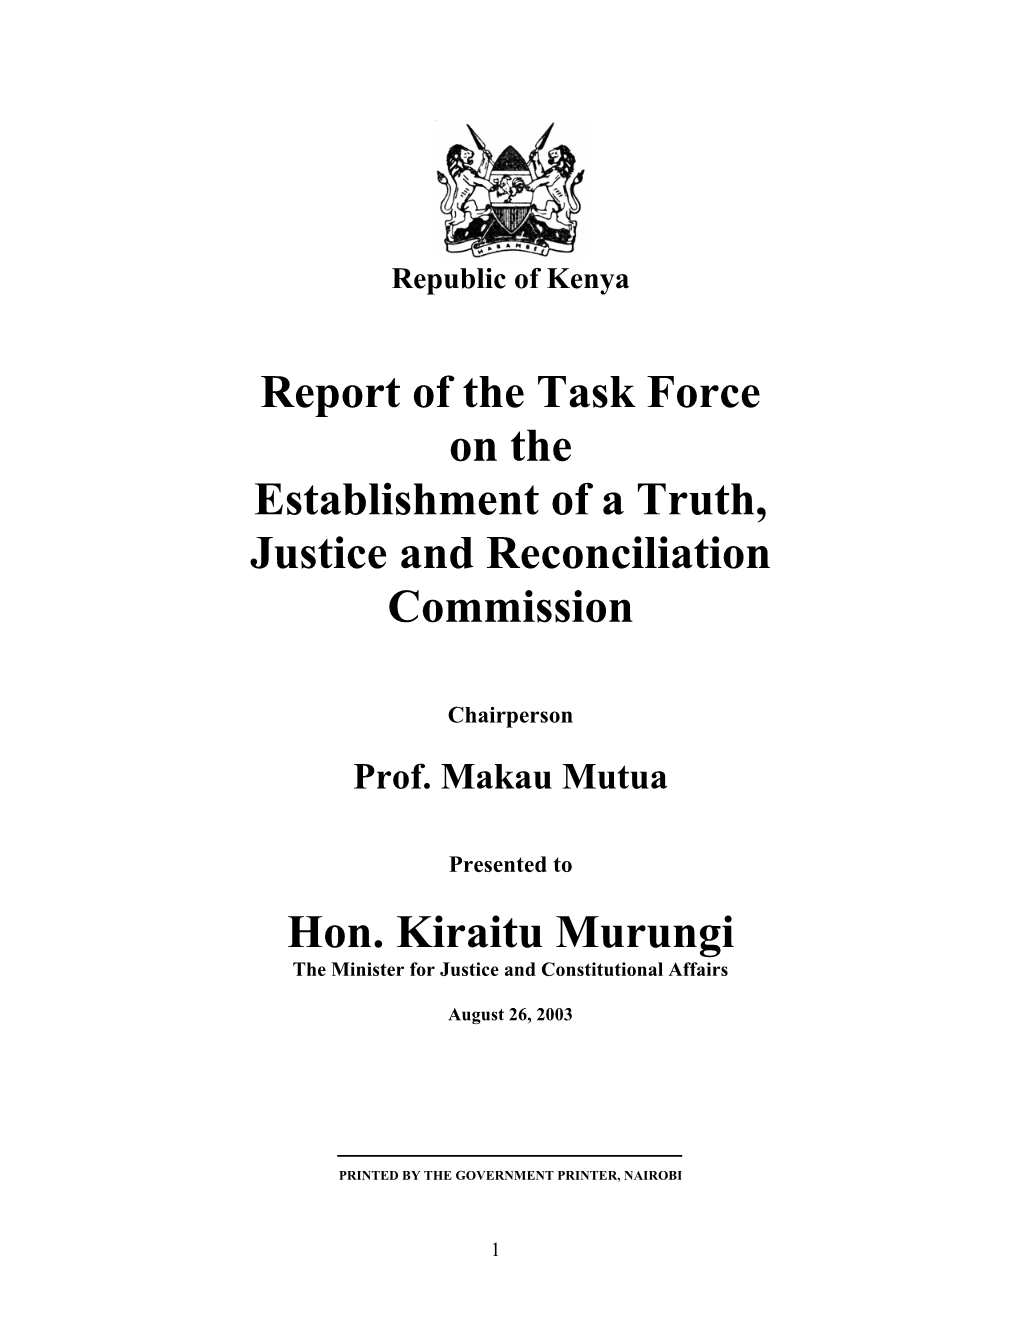 Report of the Task Force on the Establishment of a Truth, Justice and Reconciliation